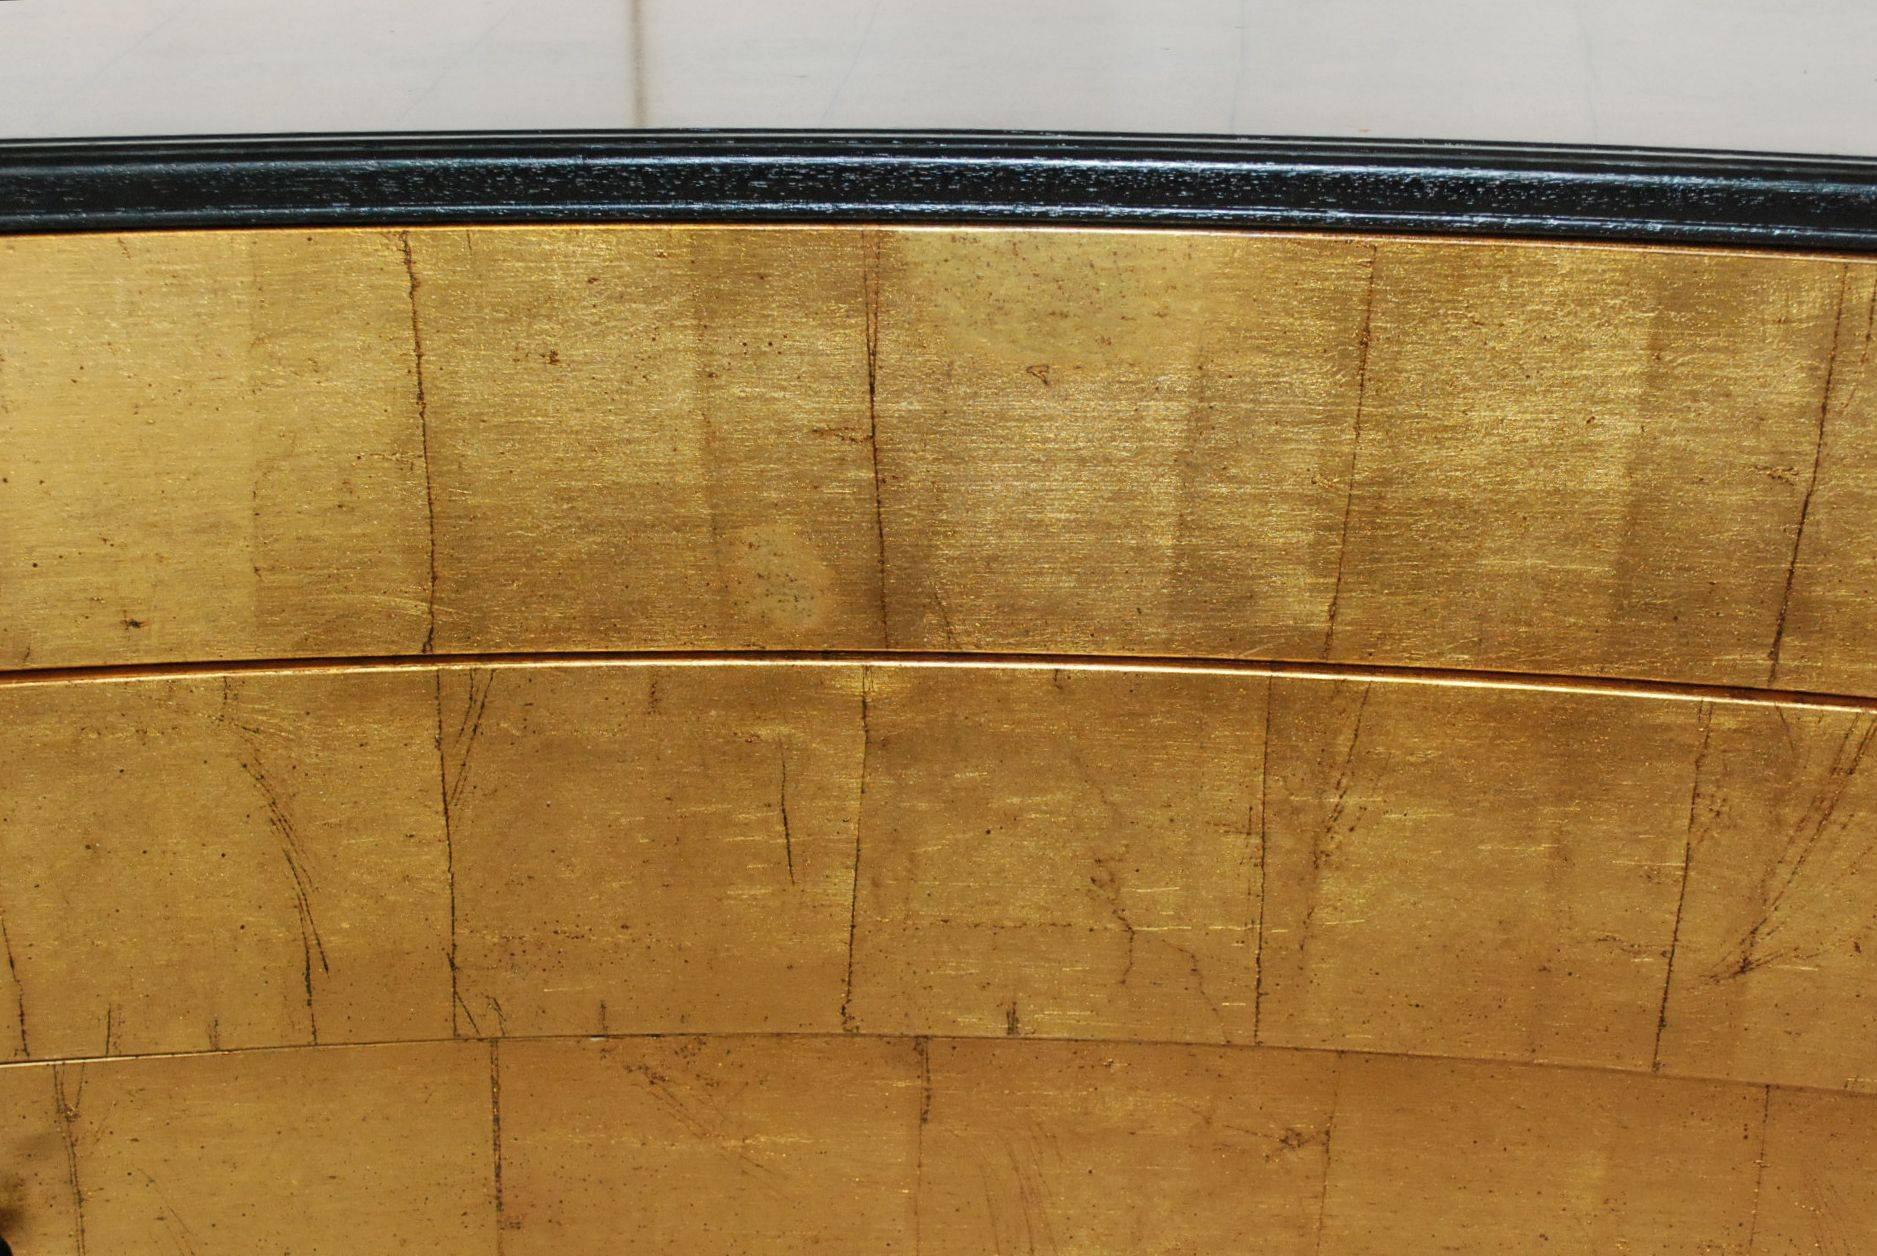 Elegant three drawers curved Louis XVI style commode cover with metallic gold leaf.
Please note: Minor scratches on gold leaf see detail pictures.